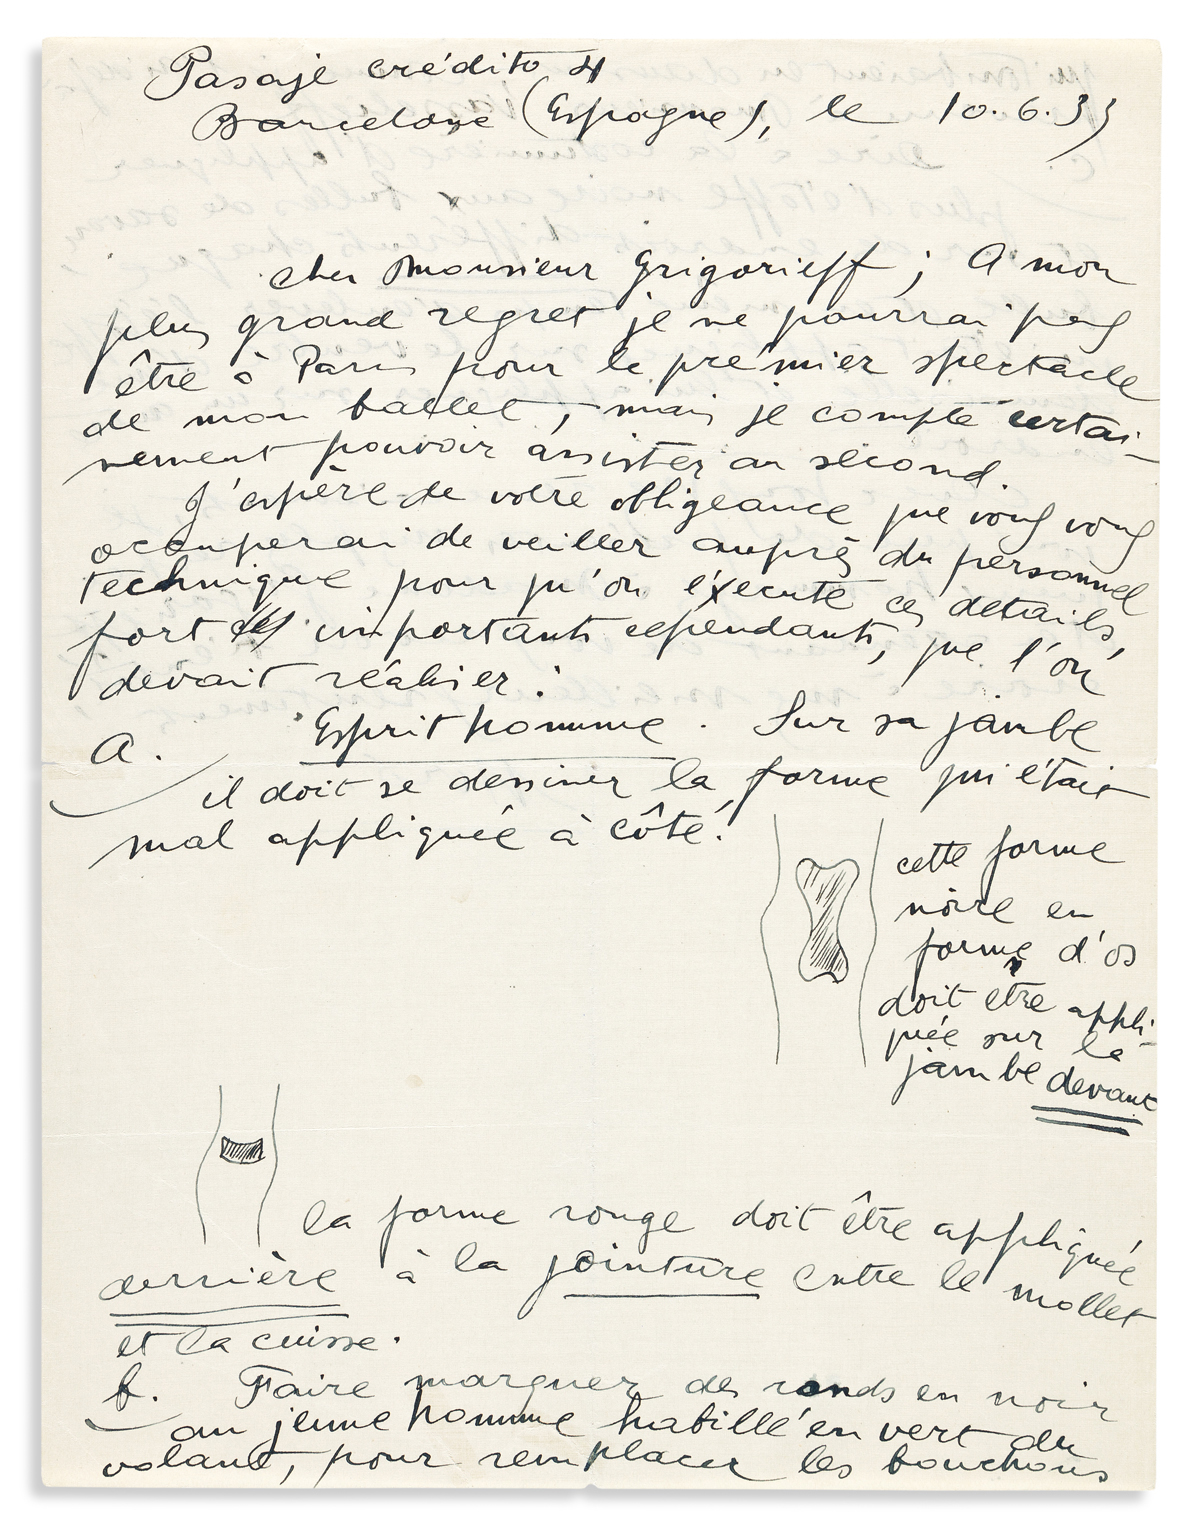 MIRÓ, JOAN. Autograph Letter Signed, Miró, to Ballets Russes director Serge Grigoriev, with two small ink drawings.